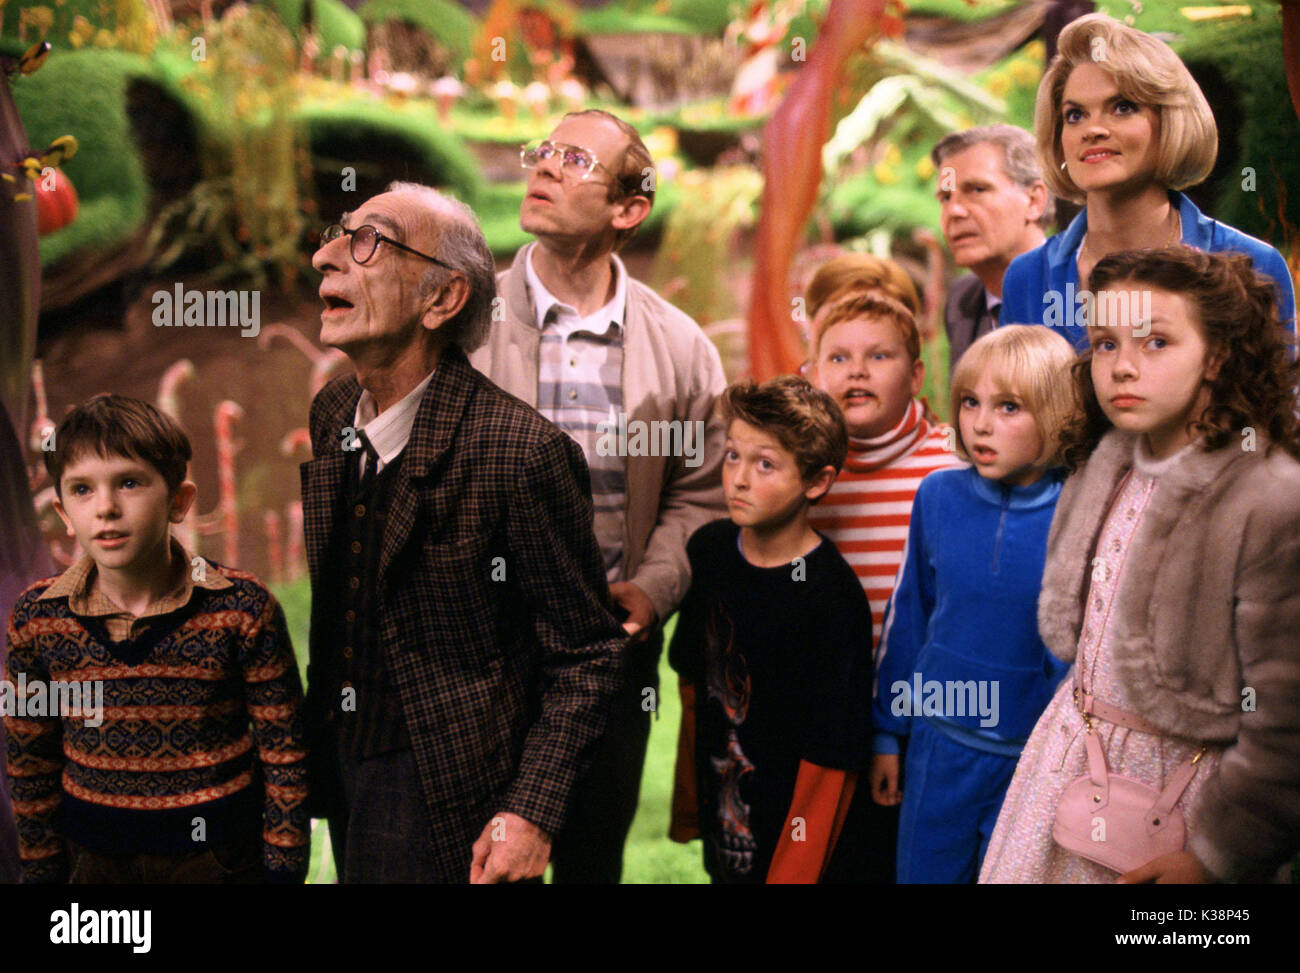 CHARLIE AND THE CHOCOLATE FACTORY FREDDIE HIGHMORE as Charlie, DAVID KELLY as Grandpa Joe, ADAM GODLEY as Mr. Teavee, JORDAN FRY as Mike Teavee, PHILLIP WIEGRATZ as Augustus, FRANZISKA TROEGNER as Mrs. Gloop, ANNASOPHIA ROBB as Violet, JAMES FOX as Mr. Salt, MISSI PYLE as Mrs. Beauregarde and JULIA WINTER as Veruca PHOTOGRAPHS TO BE USED SOLELY FOR ADVERTISING, PROMOTION, PUBLICITY OR REVIEWS OF THIS SPECIFIC MOTION PICTURE AND      Date: 2005 Stock Photo